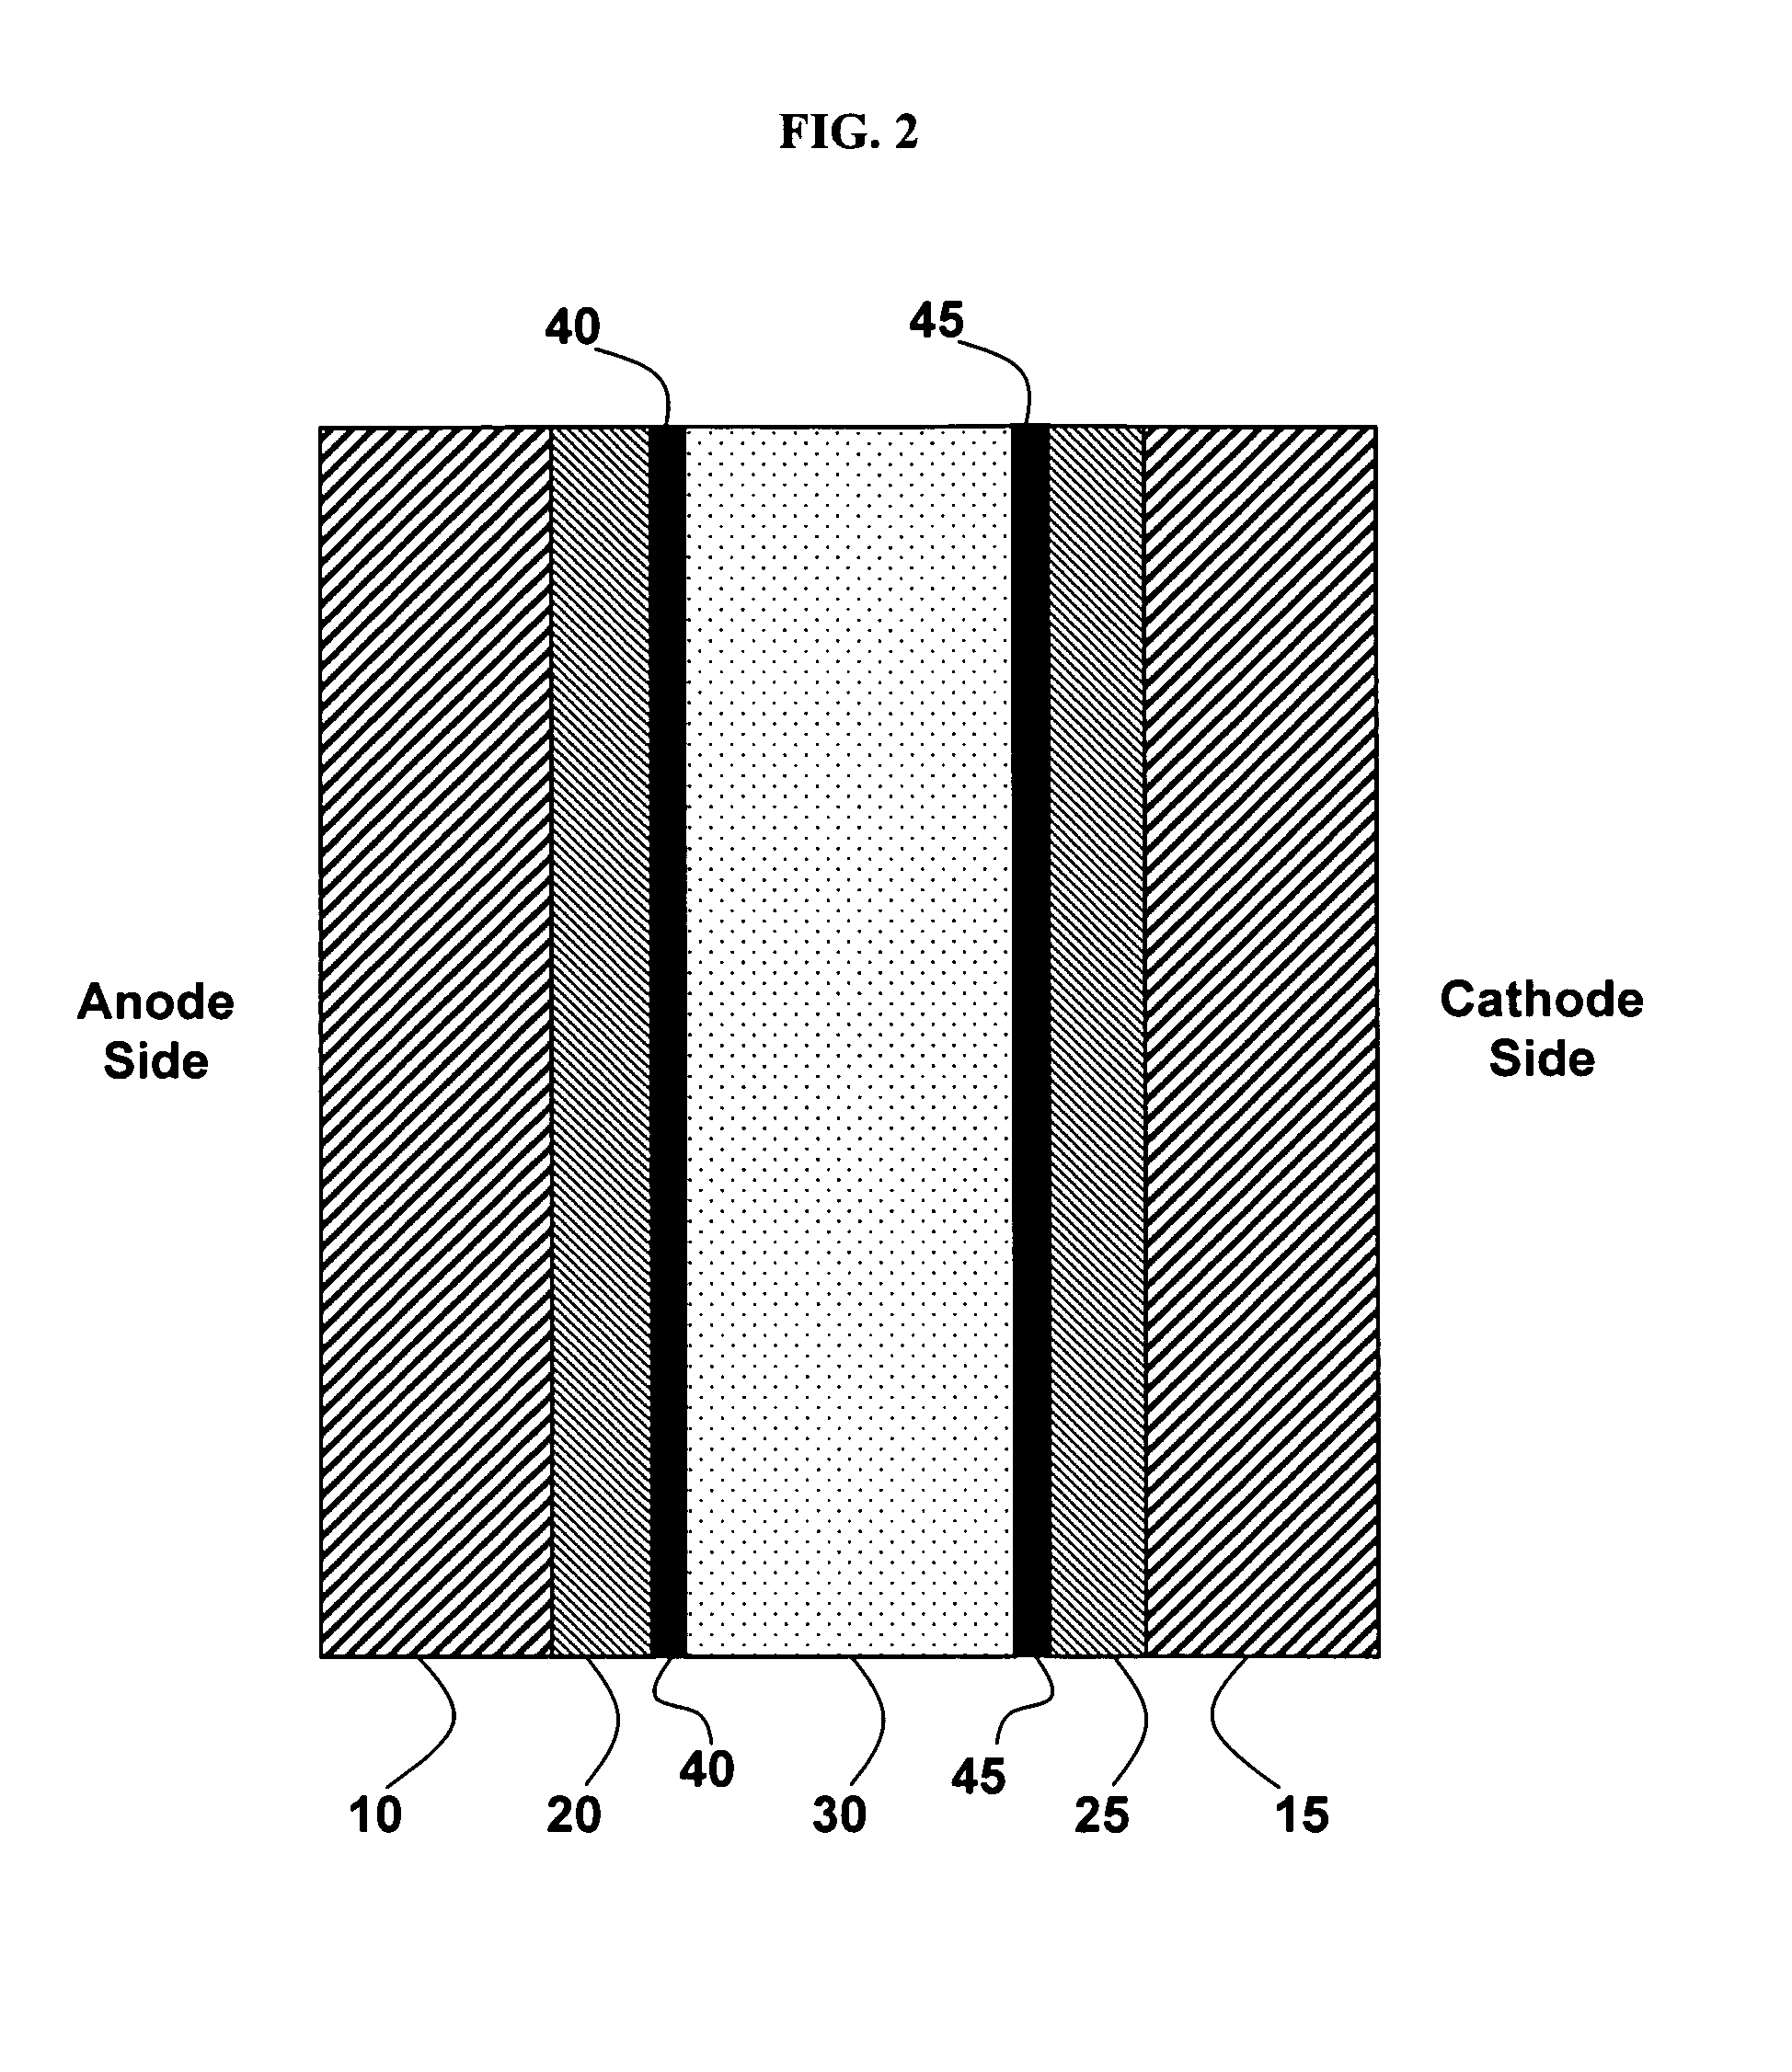 Methods for fabricating inorganic proton-conducting coatings for fuel-cell membranes